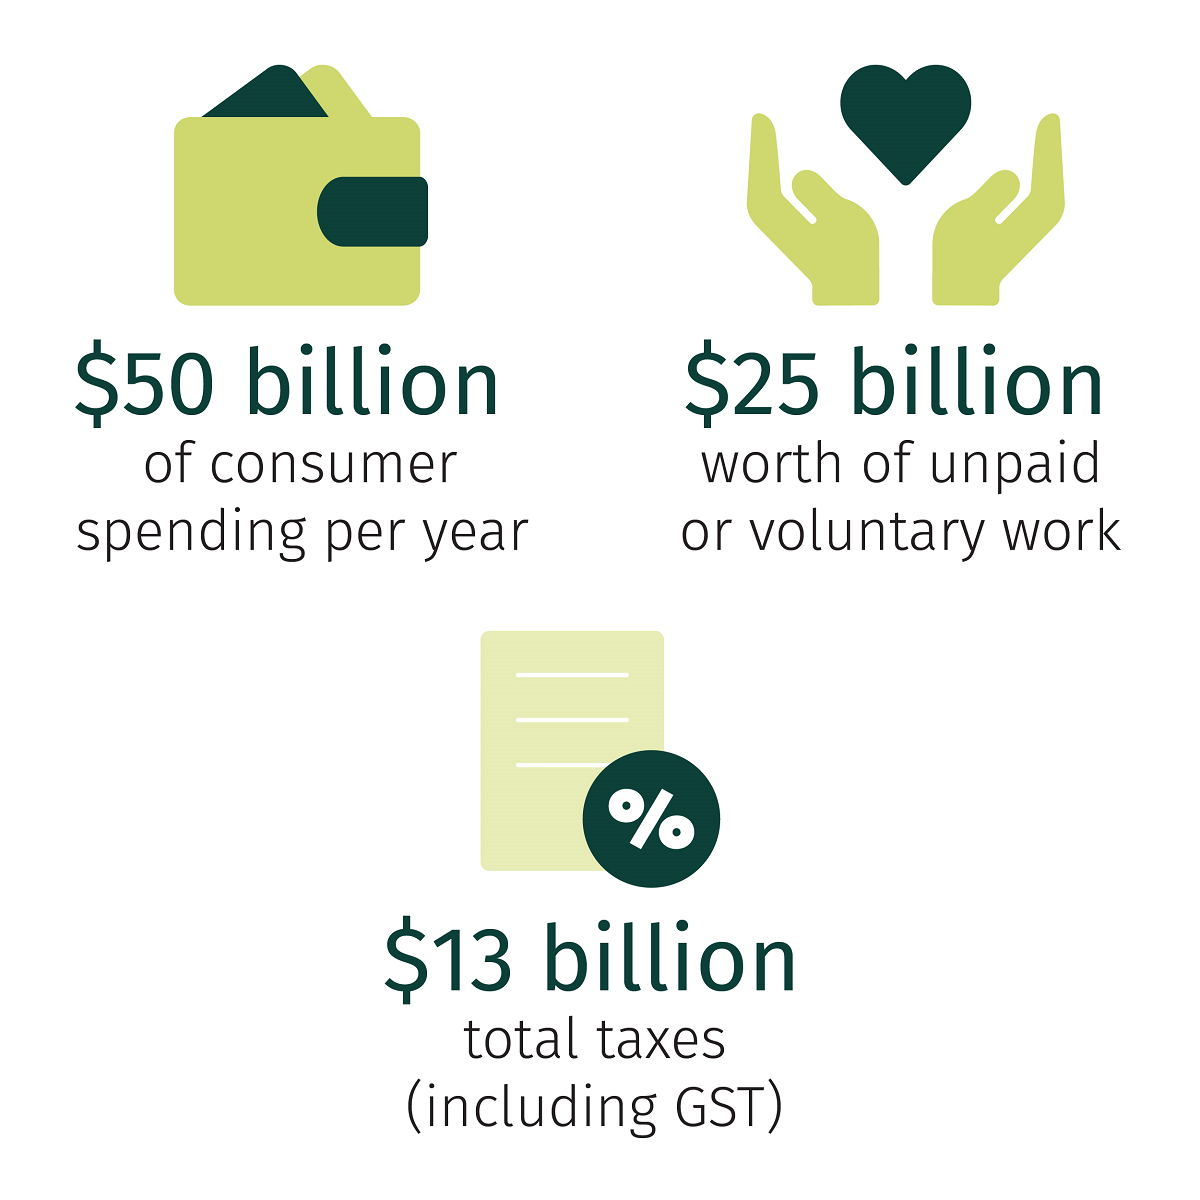 By 2036, those aged 65+ will contribute (in 2016 dollars): $50 billion of consumer spending per year, $25 billion worth of unpaid voluntary work, $13 billion total taxes (including GST).